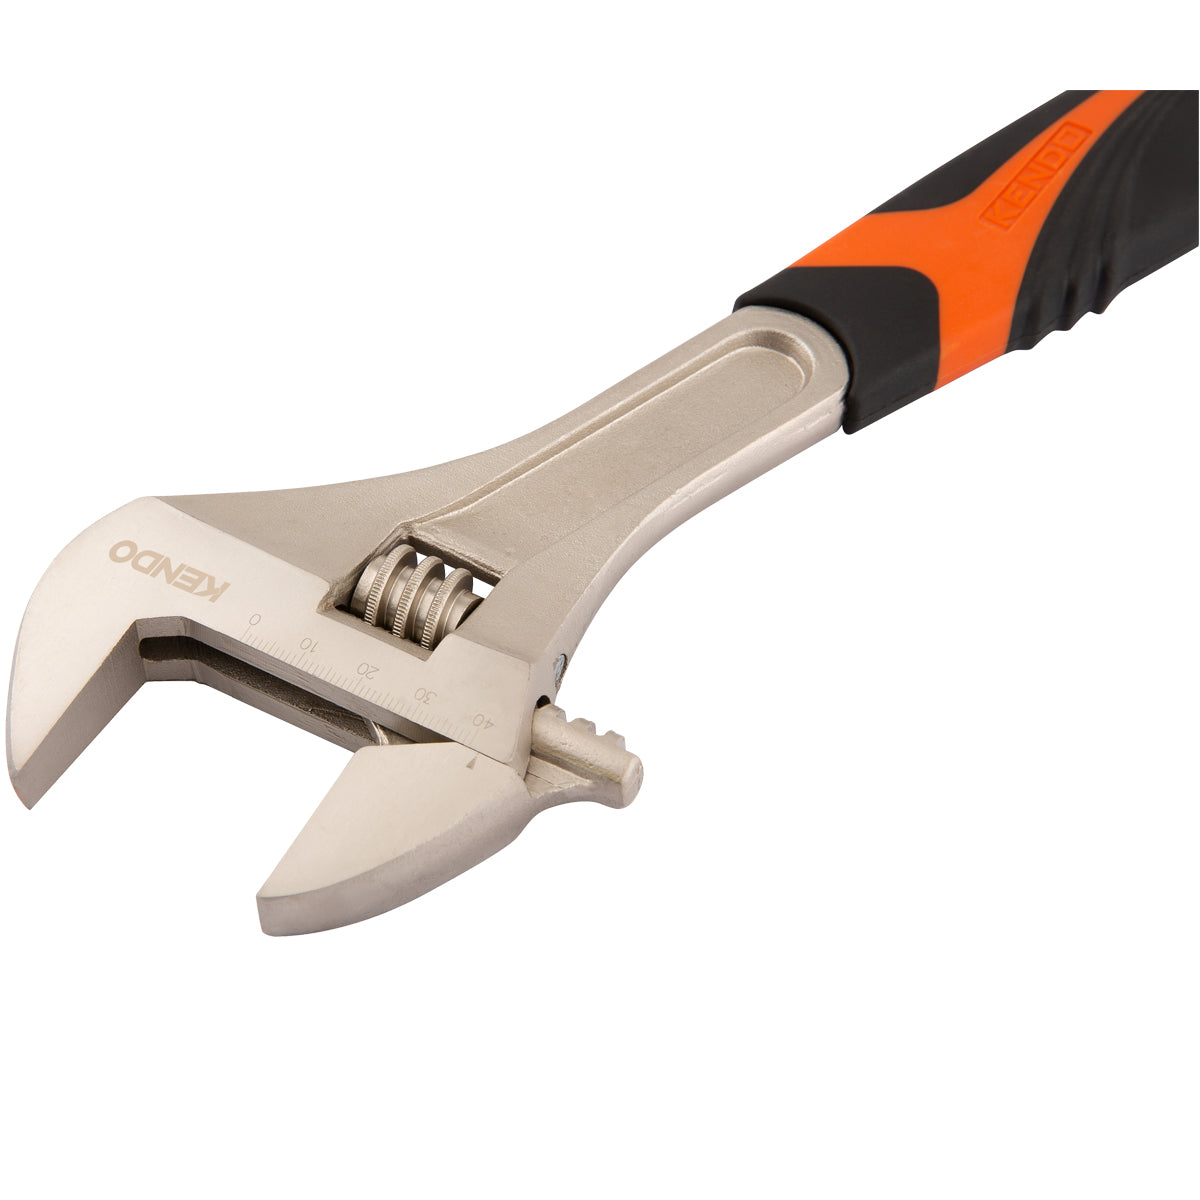 Kendo 250mm Extra-Wide Opening Adjustable Wrench